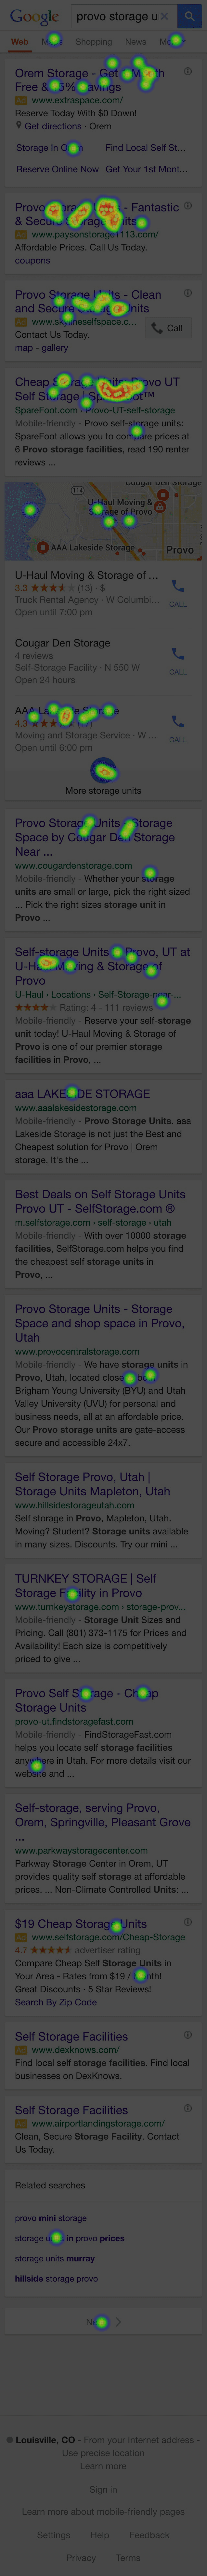 Provo-Storage-Unit-Mobile-•-Test-Results-⋅-UsabilityHub (1)